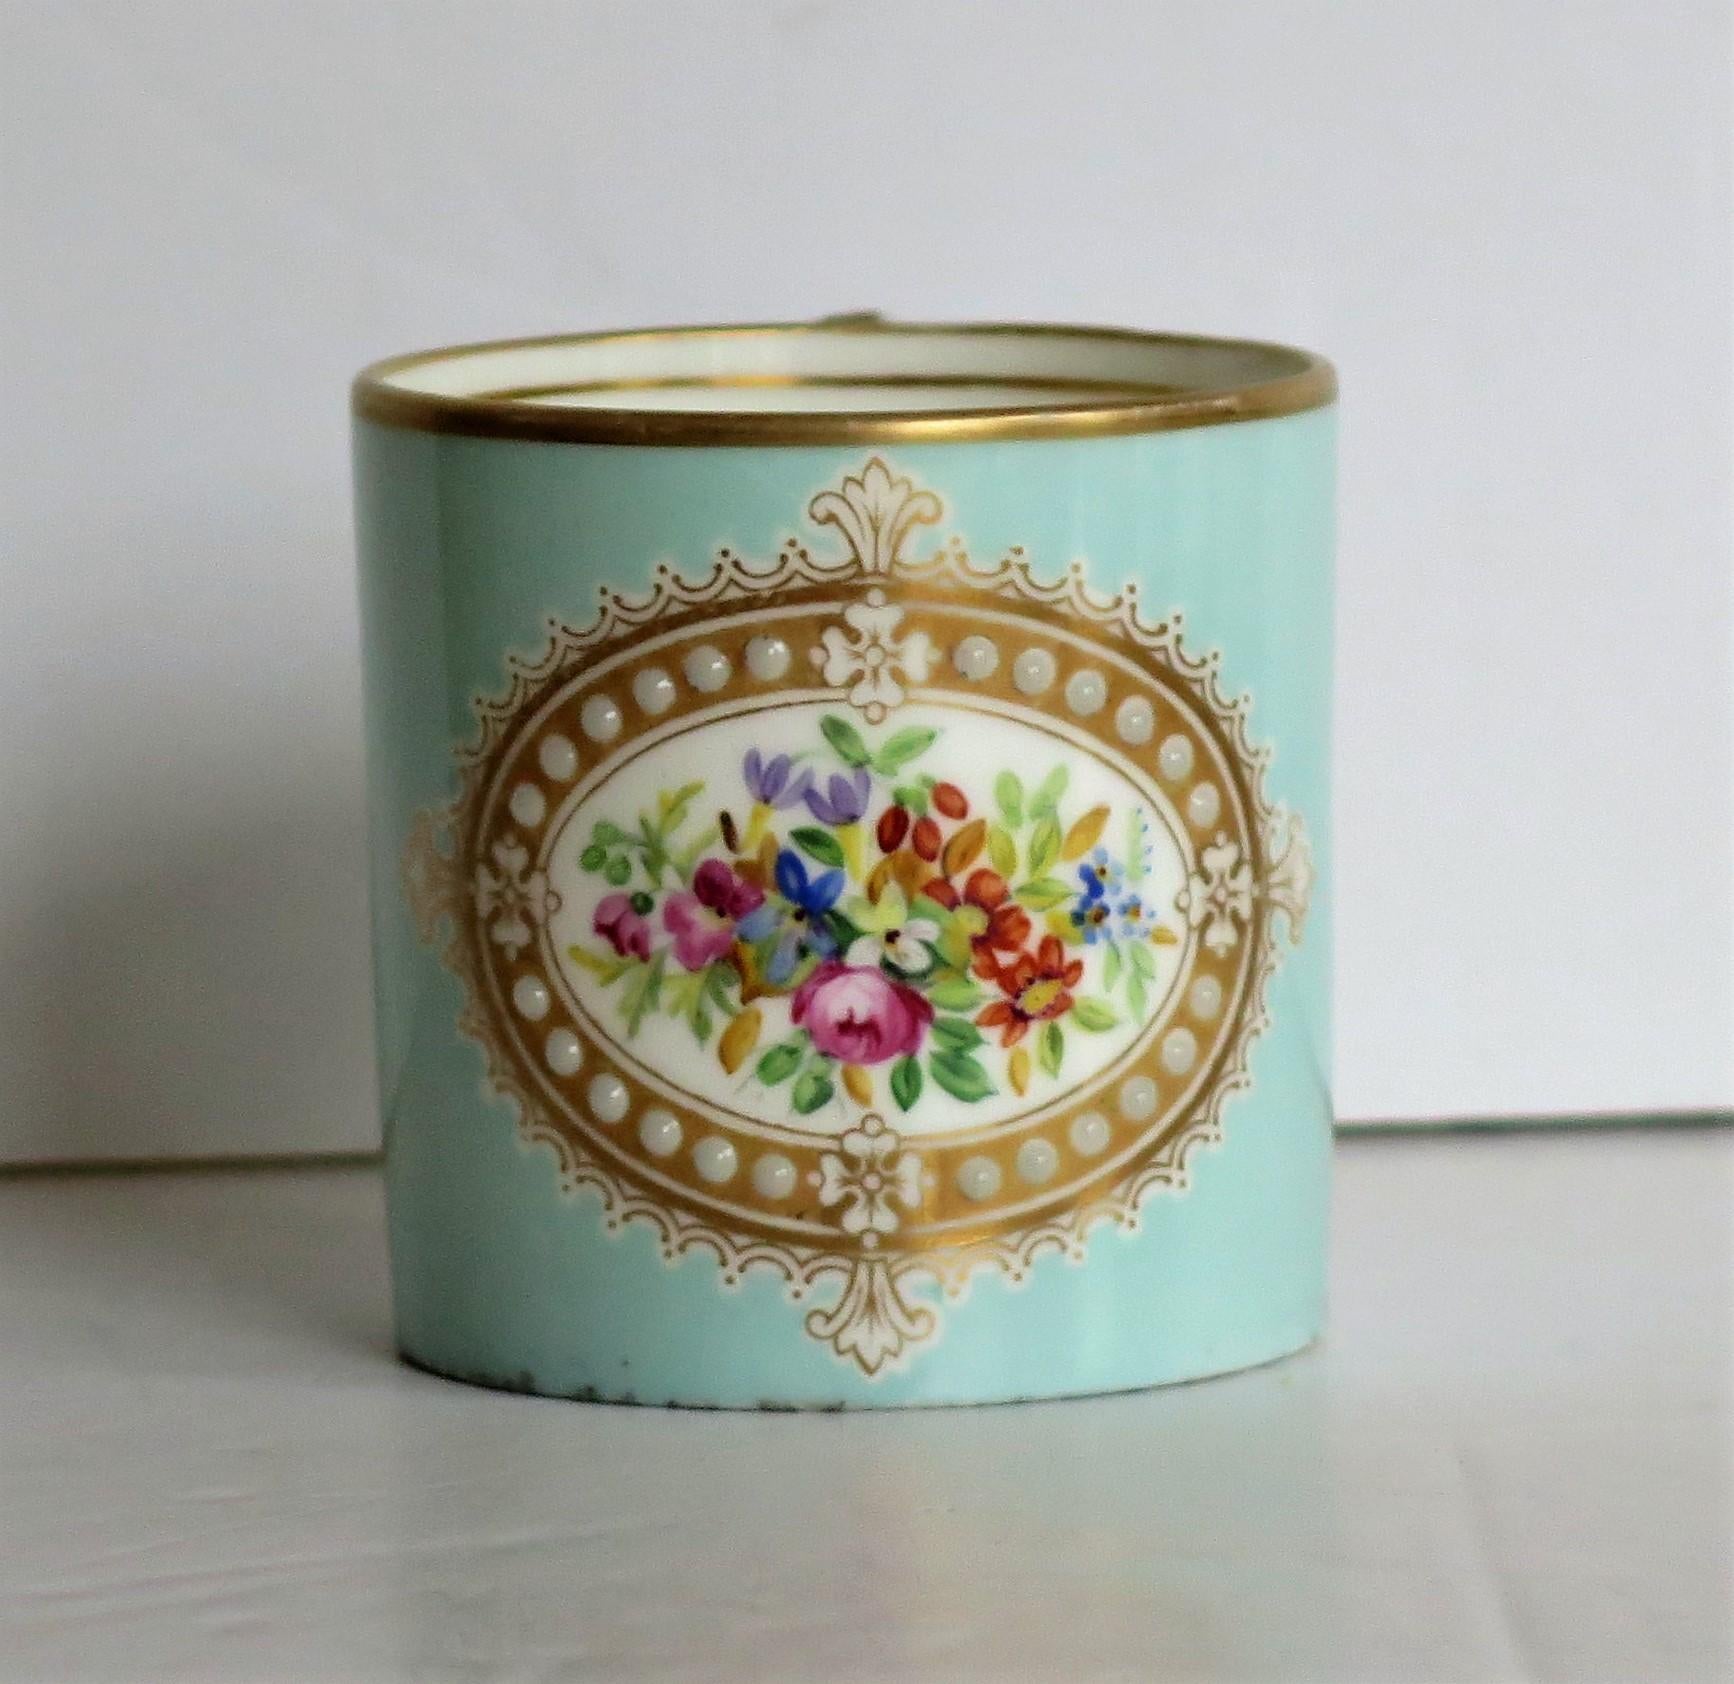 This is a very beautiful jewelled coffee can all hand painted and gilded in the French Sevres style, possibly made by them and dating to the early 19th century, circa 1810.

This coffee can is well potted and is nominally straight sided with a